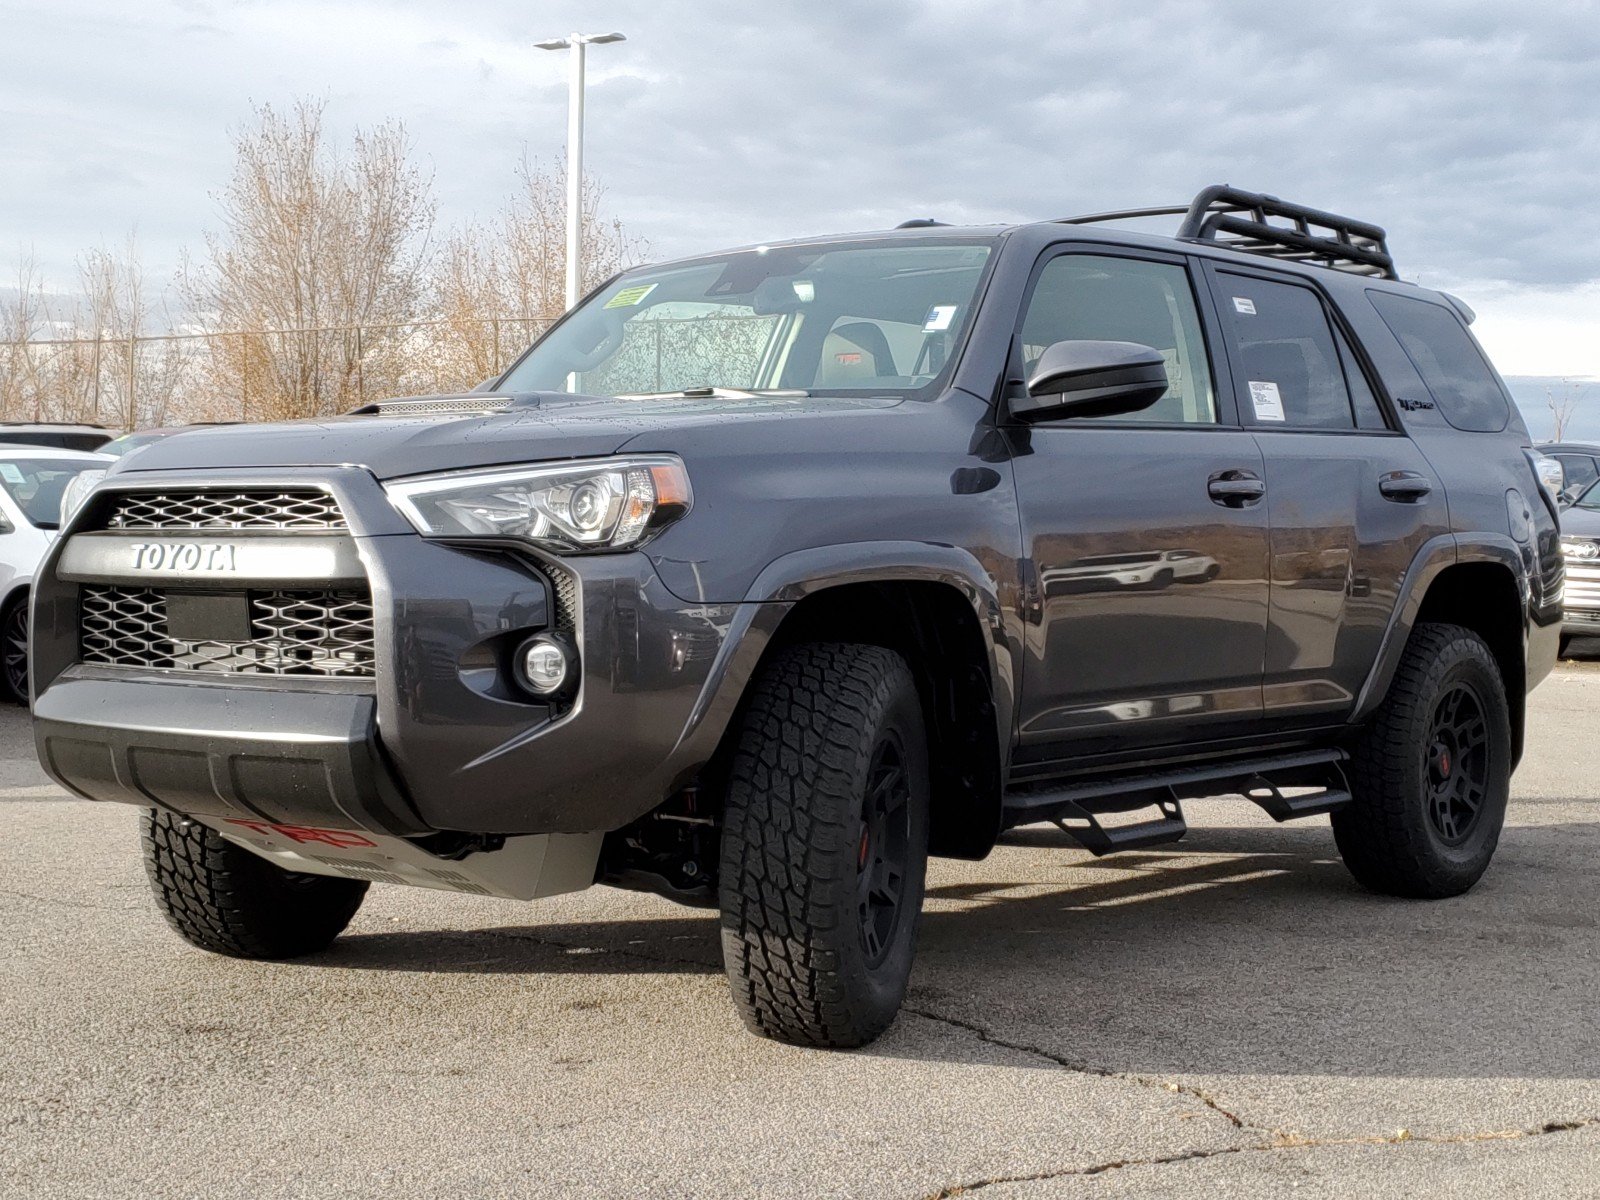 2020 Toyota 4Runner Trd Pro For Sale - Great Deals on a new 2020 Toyota